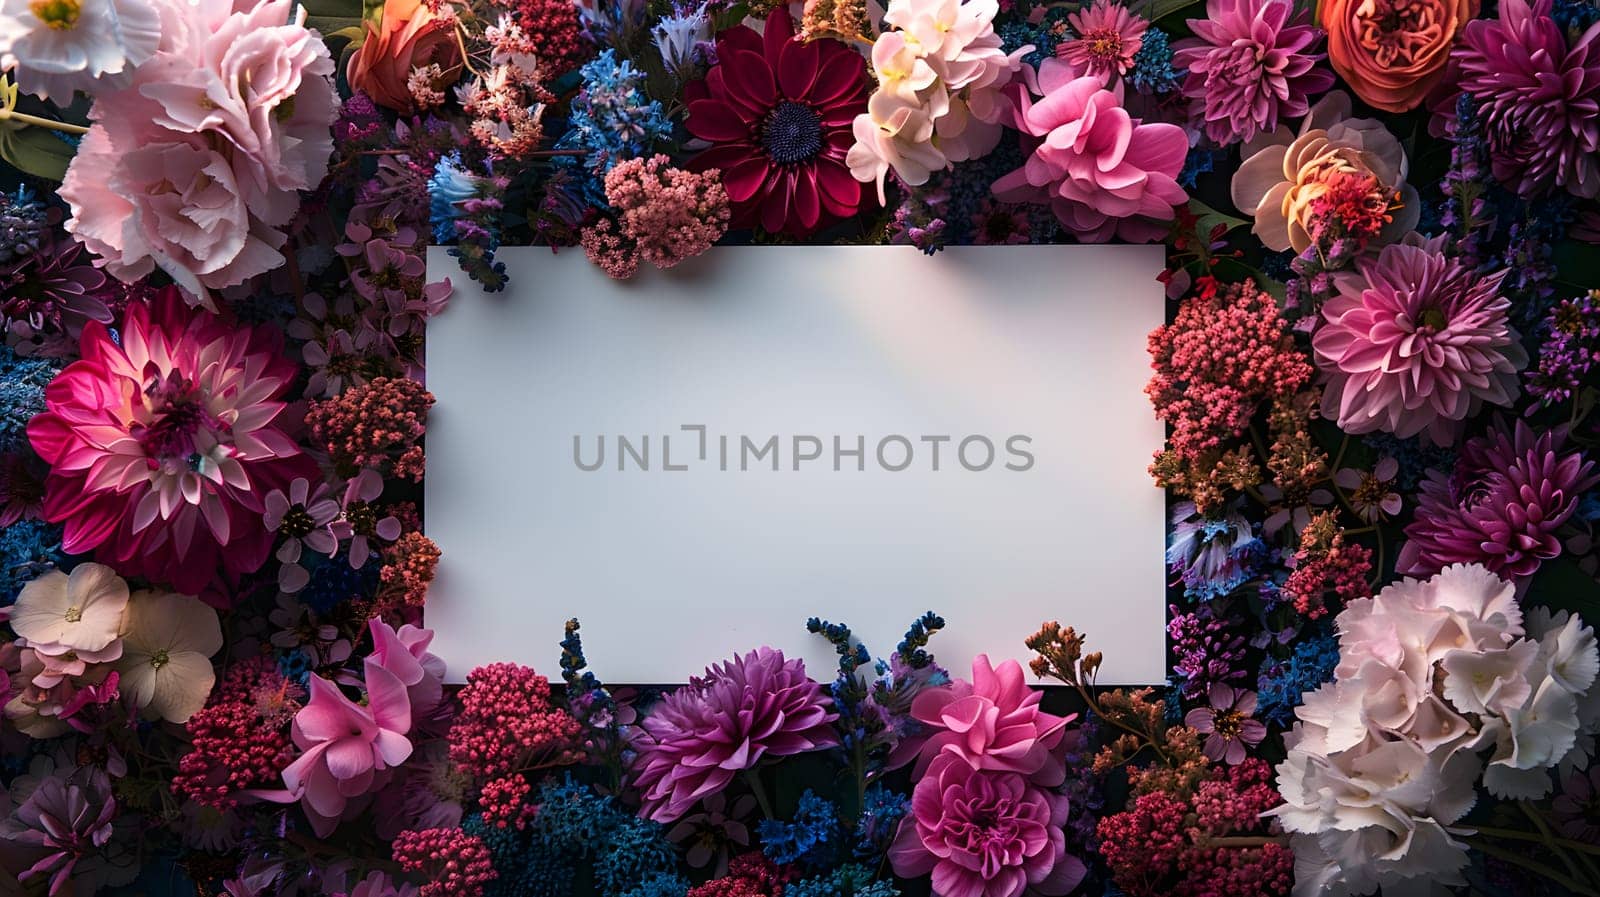 A white card is elegantly framed by vibrant flowers in shades of purple, pink, and magenta. The colorful display creates a beautiful contrast in a creative arts event